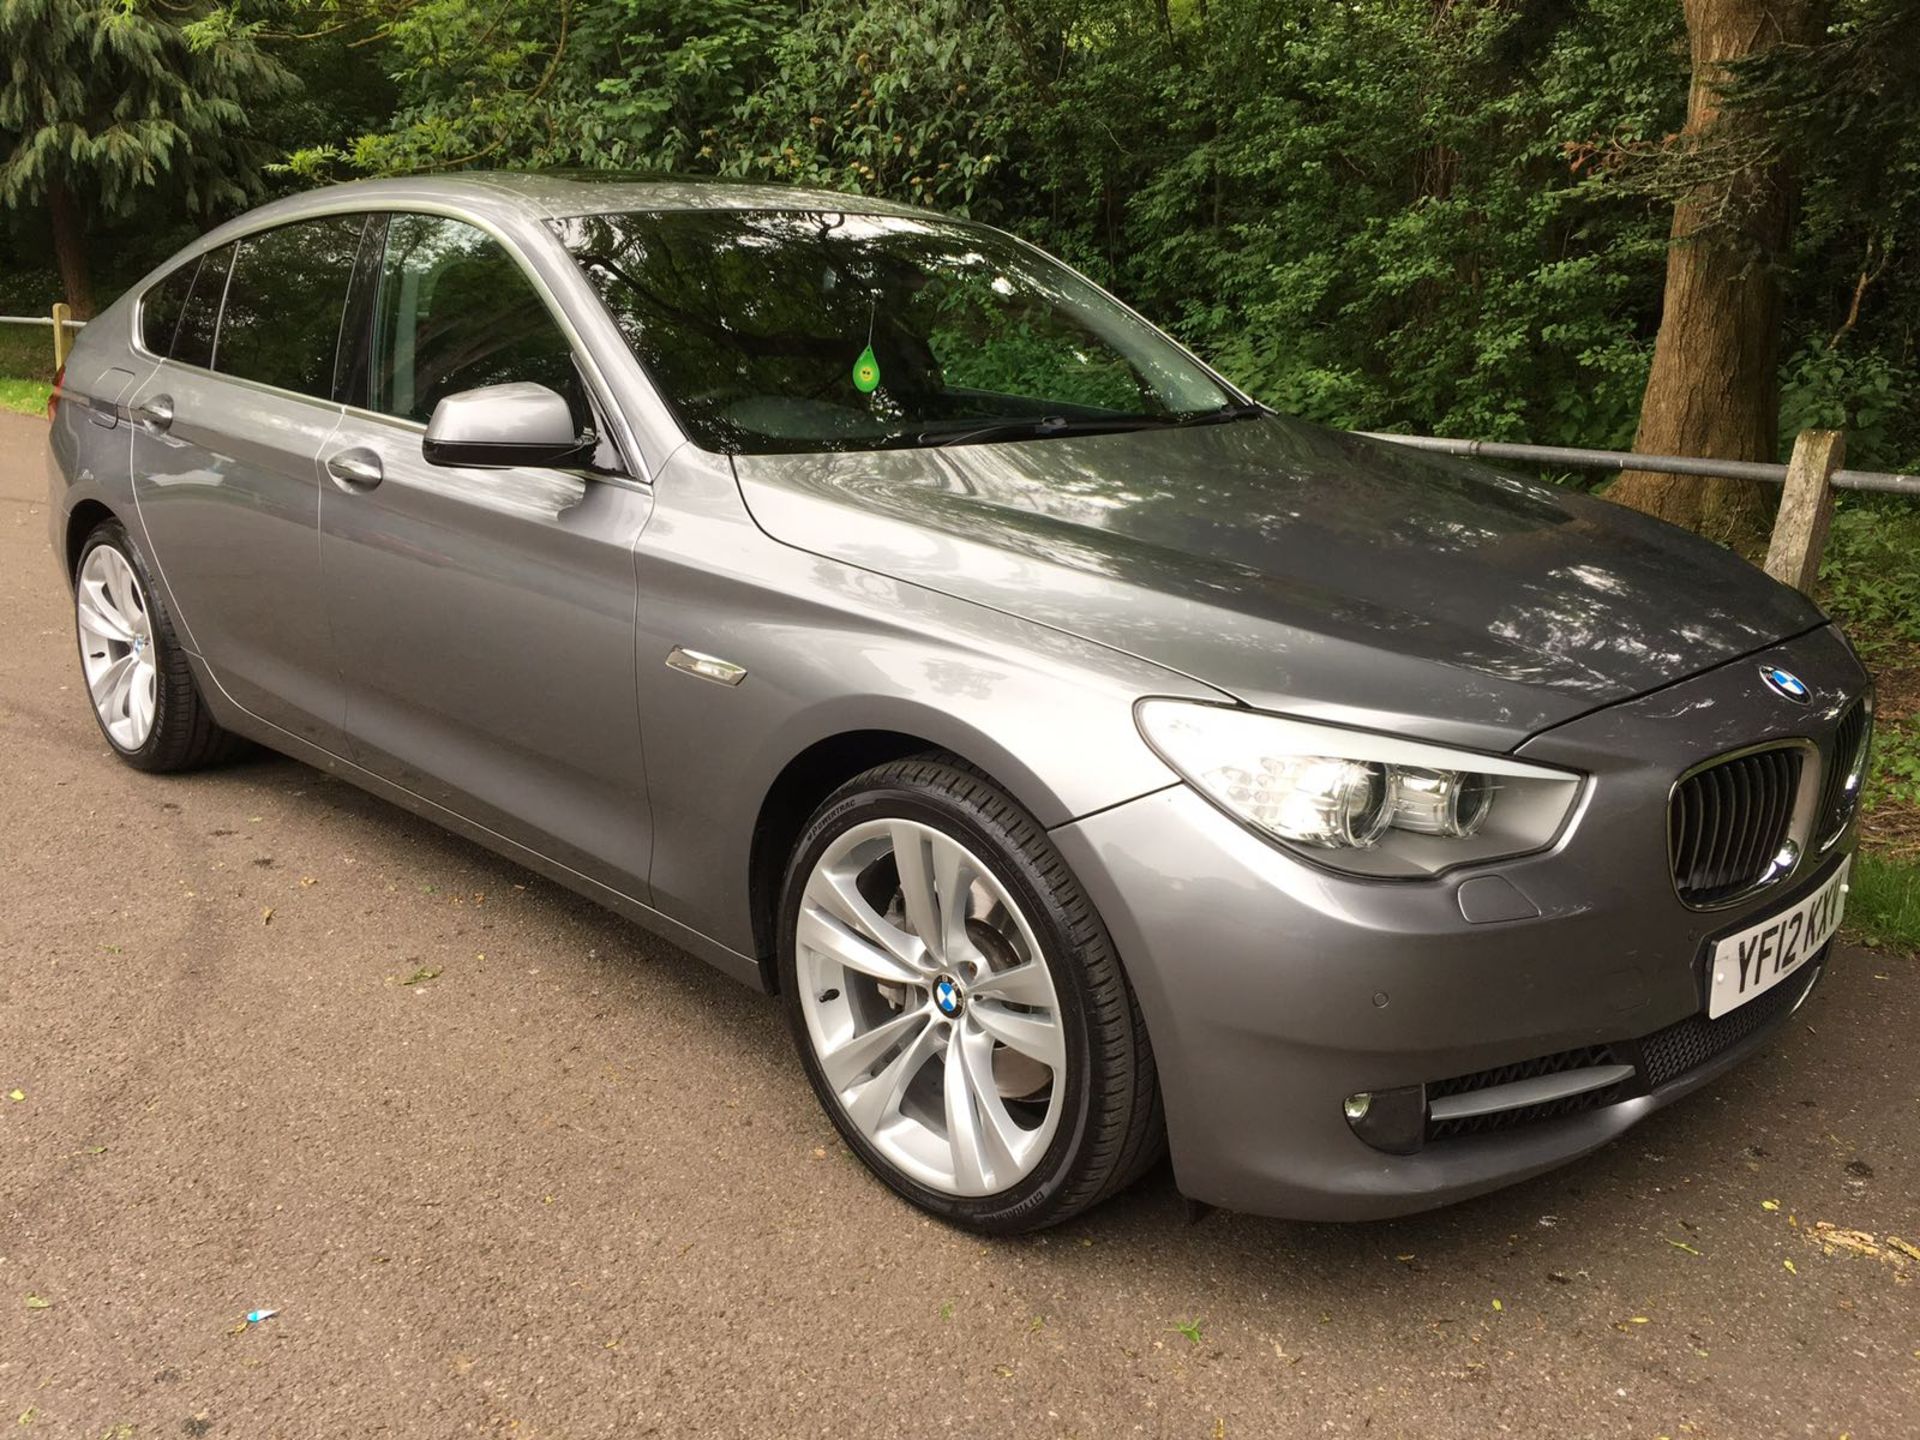 BMW 535D GT Gran Turismo 2012/12. 57,000 Miles. Automatic Gearbox - Image 8 of 19